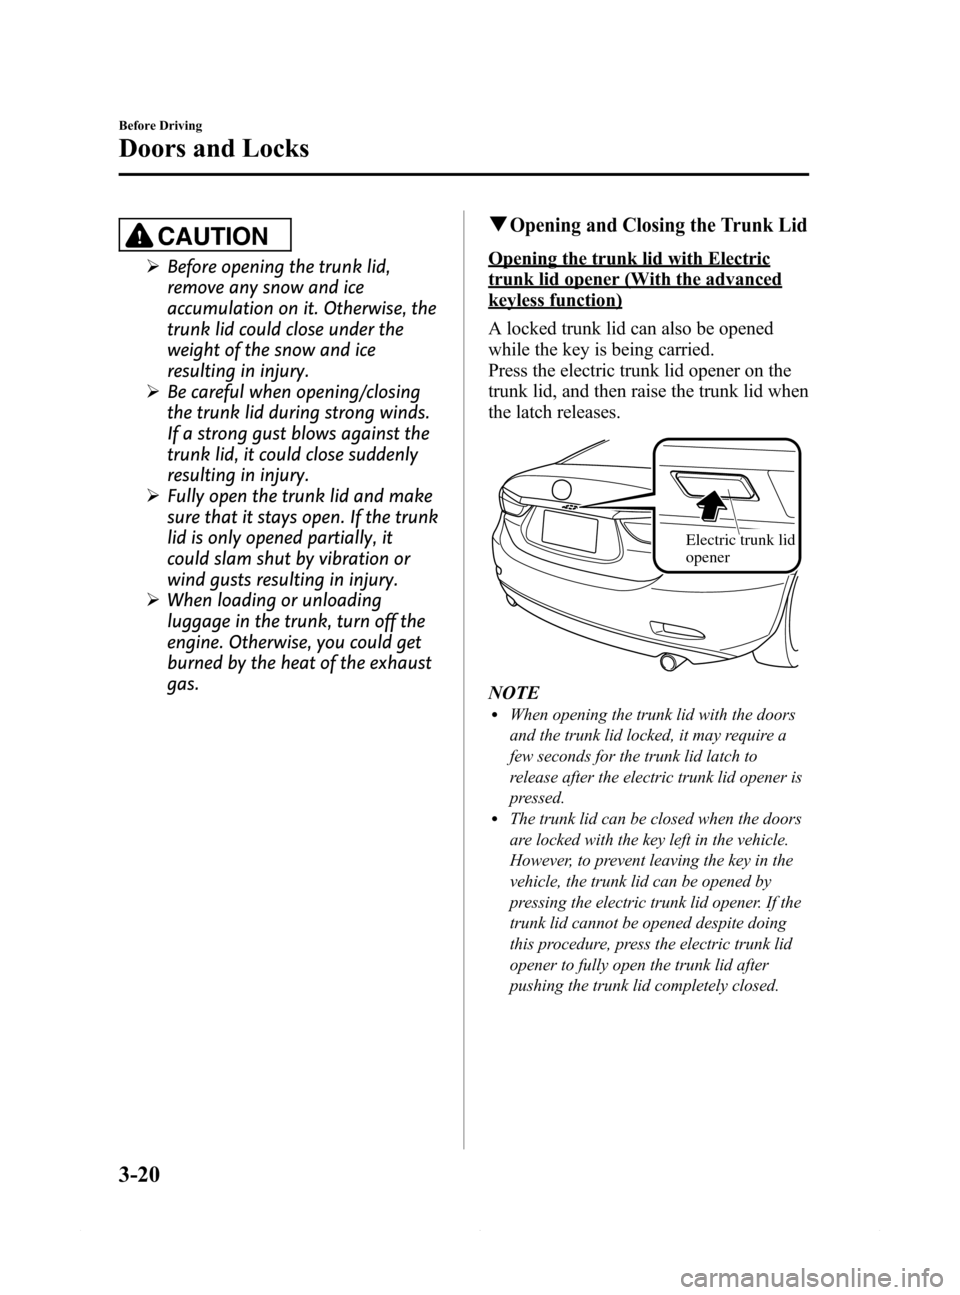 MAZDA MODEL 6 2015  Owners Manual (in English) Black plate (92,1)
CAUTION
ØBefore opening the trunk lid,
remove any snow and ice
accumulation on it. Otherwise, the
trunk lid could close under the
weight of the snow and ice
resulting in injury.
Ø